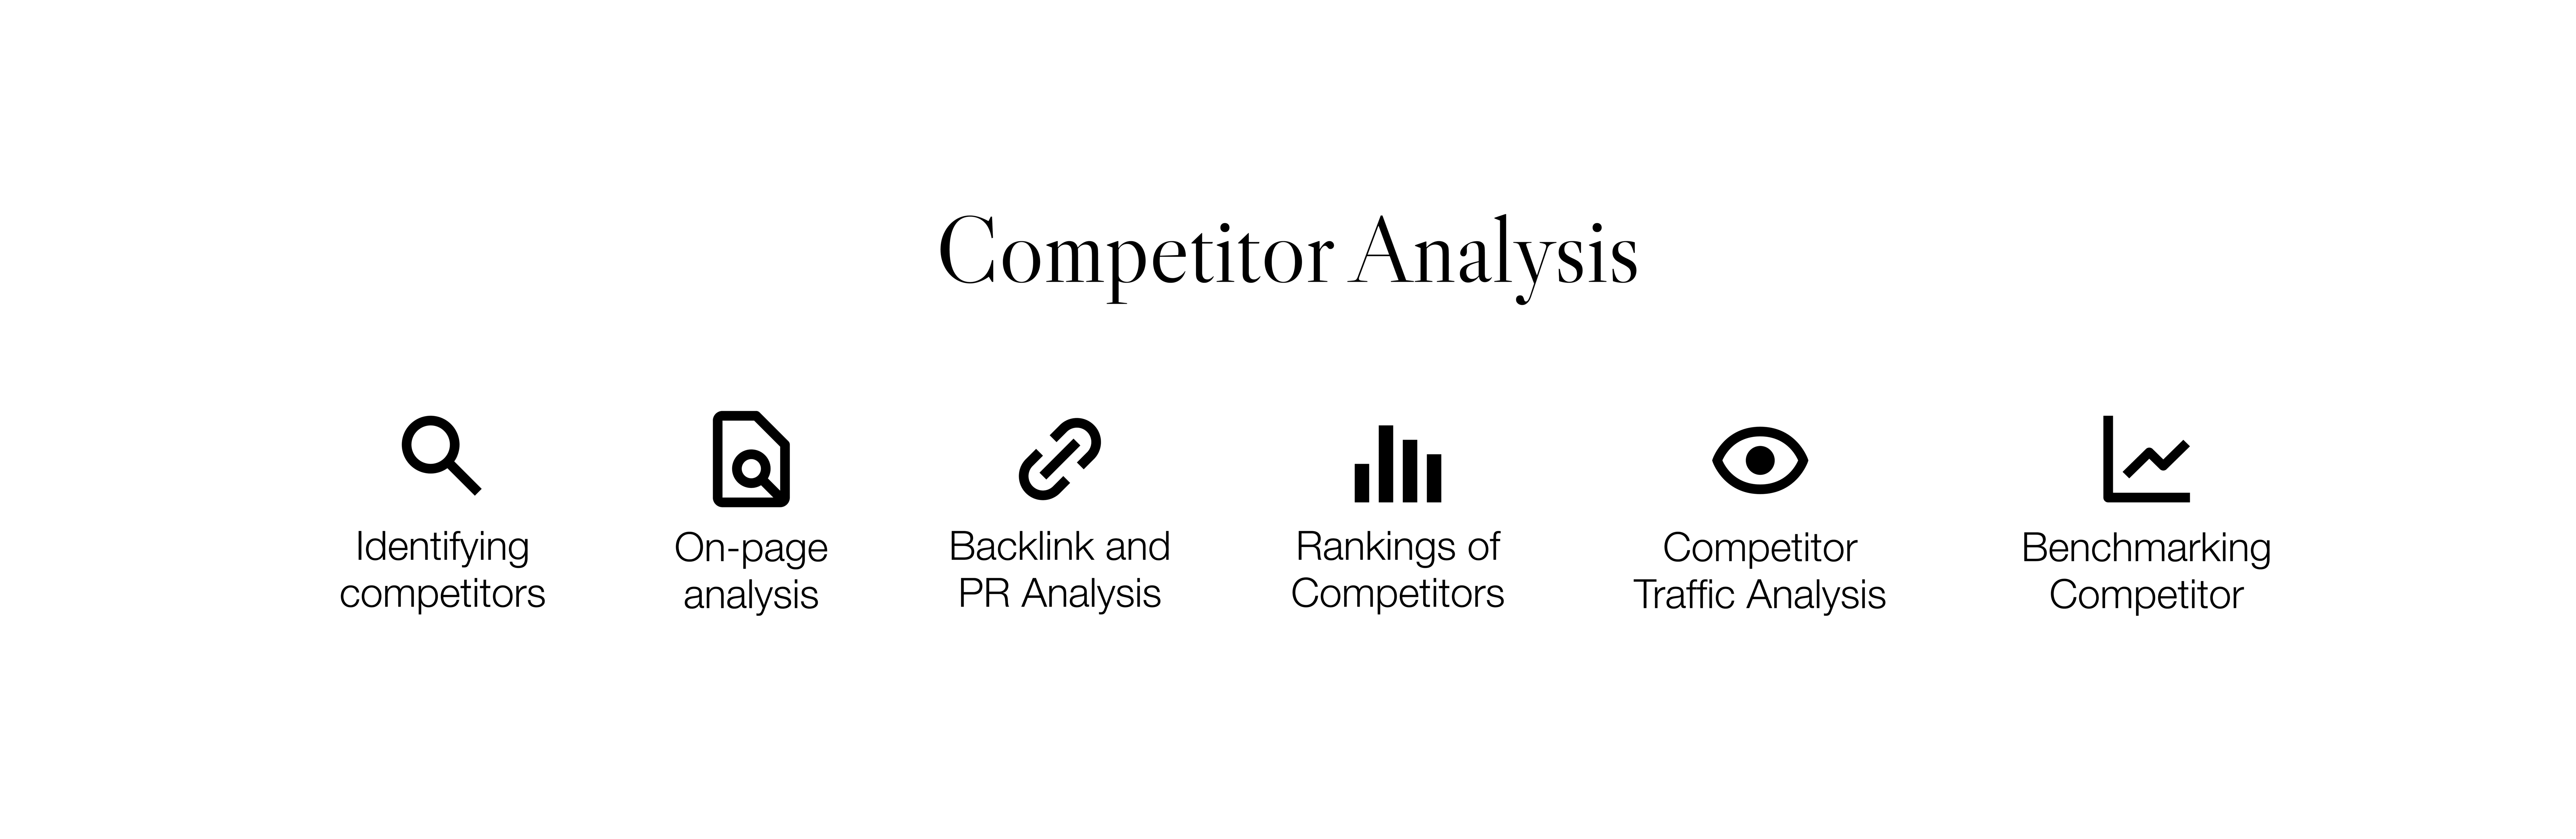 a graphic showing the elements of competitor analysis described in the text